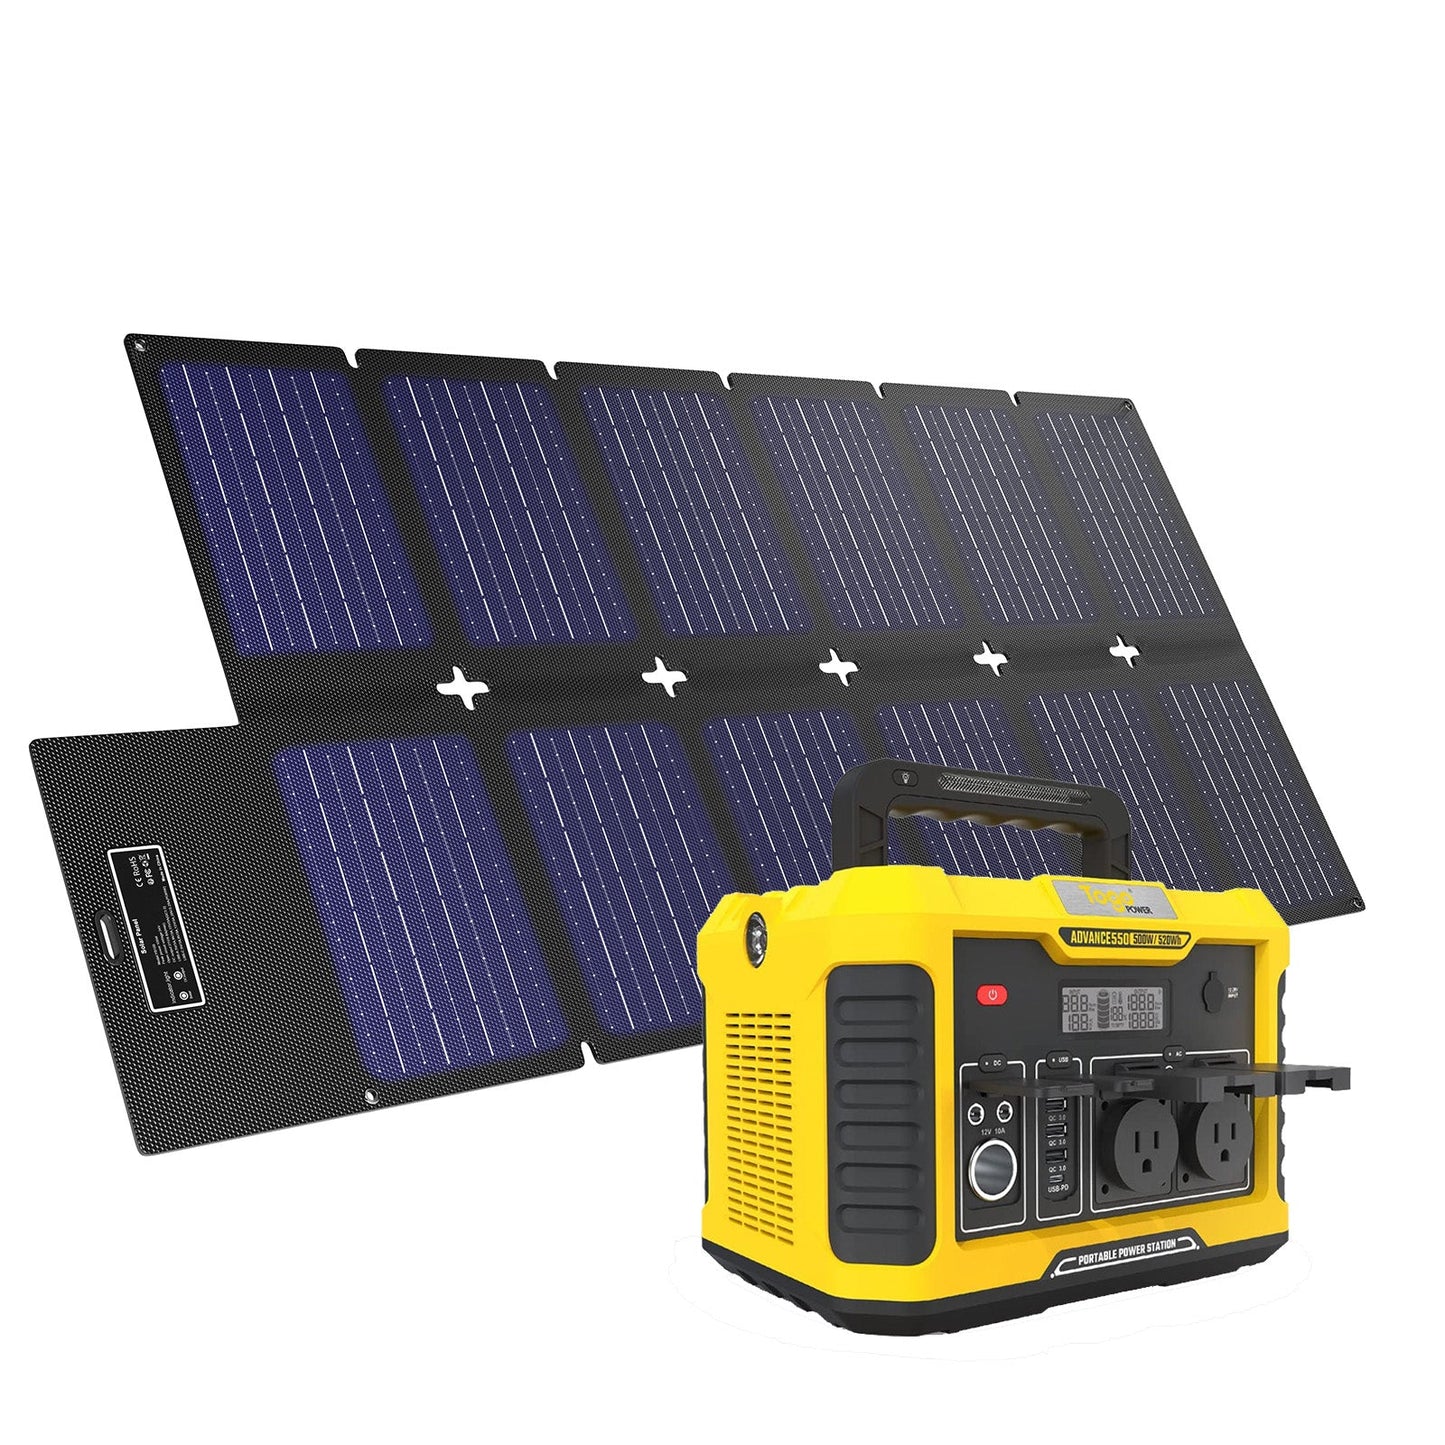 Togopower Power Station Advance550, 520wh with Yargopower 100W Solar Panel(YB) Included, For Outdoor, Camping, Hiking, Fishing, Power Outages, Travel, Hunting, Emergency